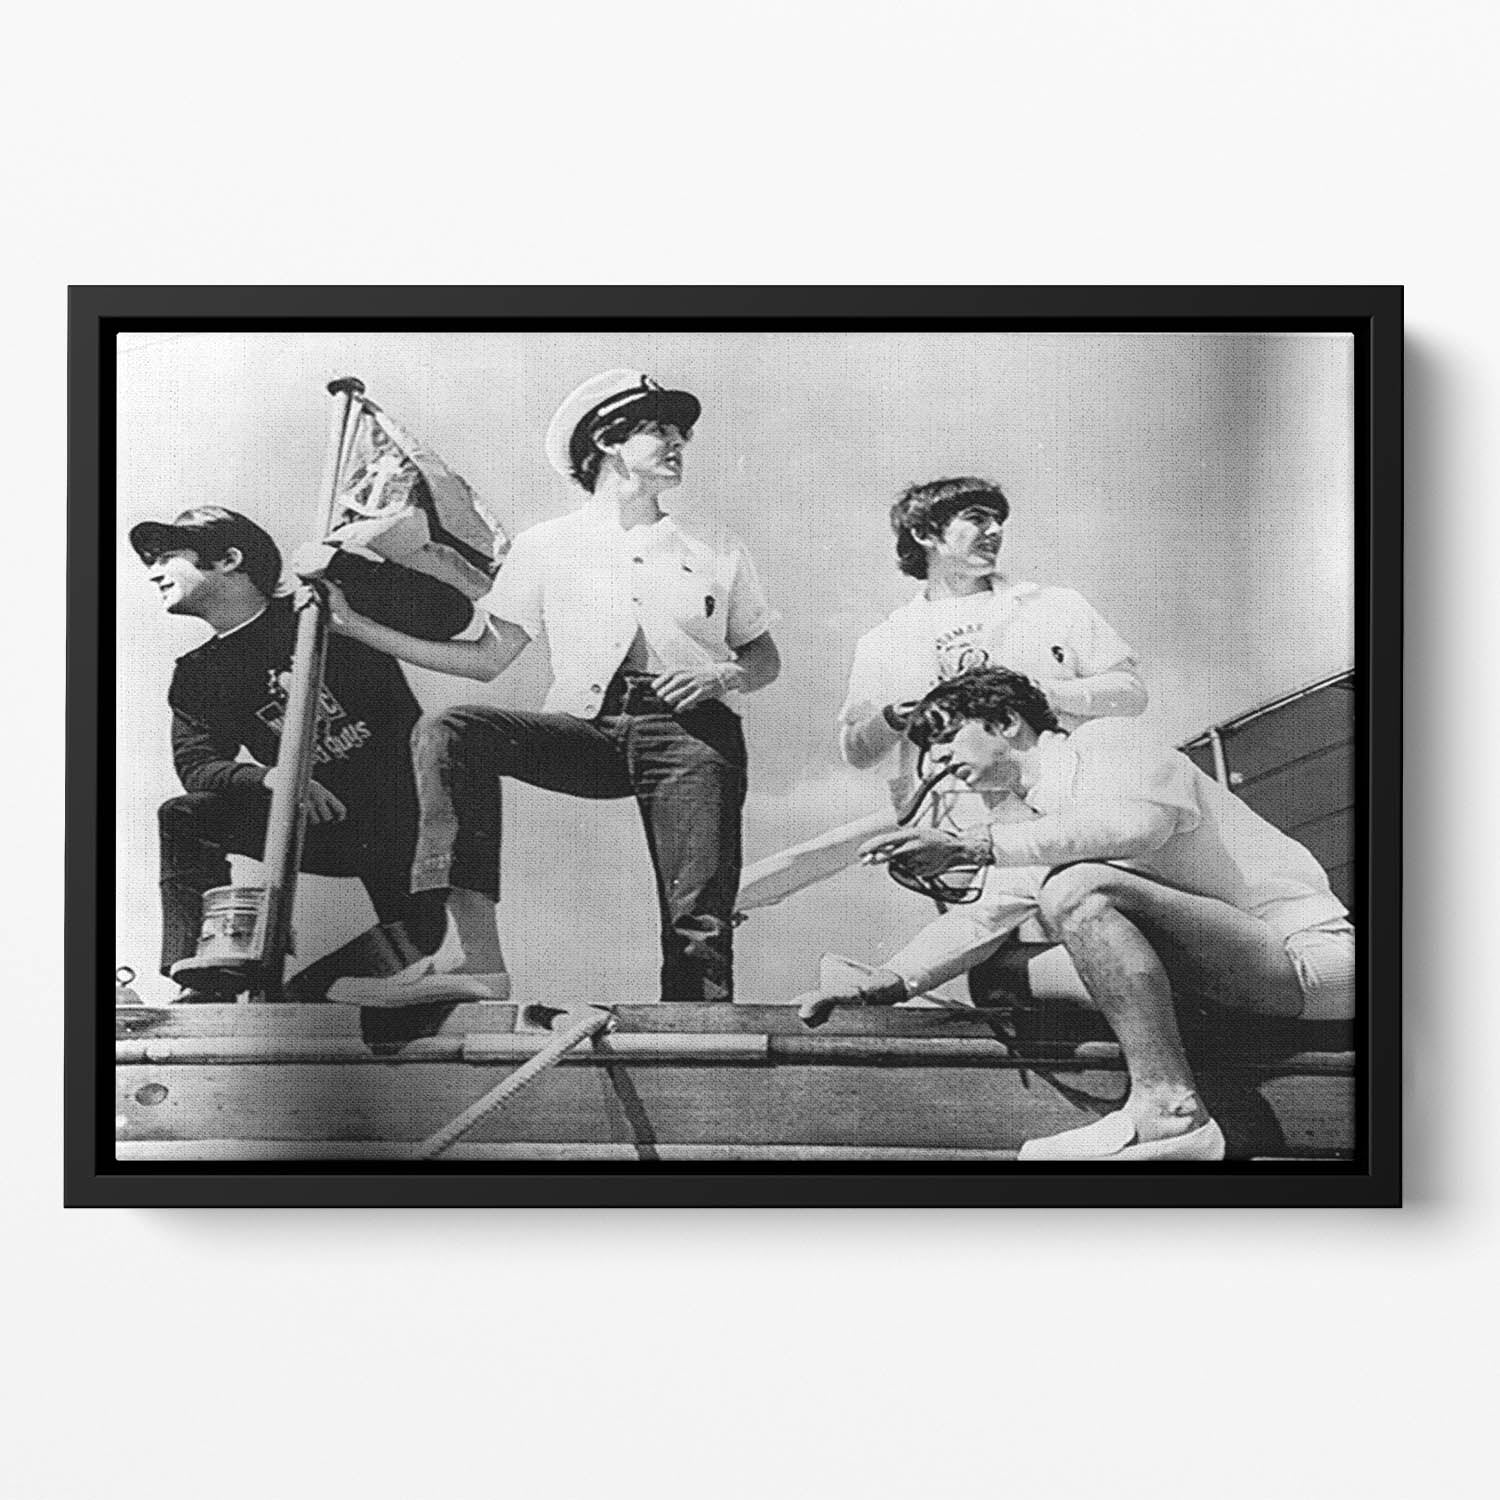 The Beatles on board a yacht Floating Framed Canvas